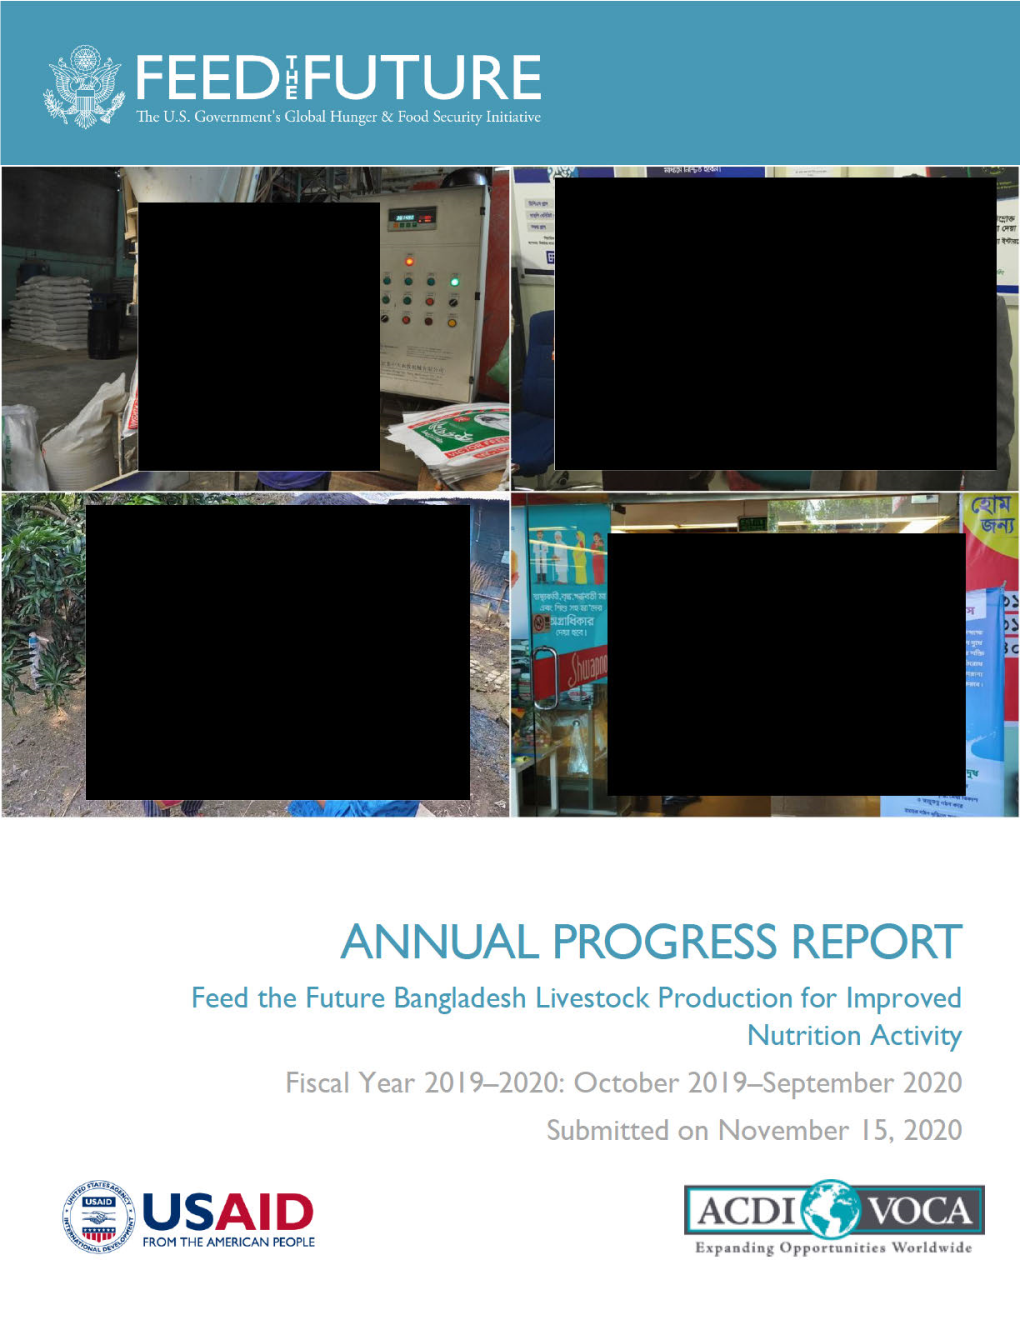 ANNUAL PROGRESS REPORT Feed the Future Bangladesh Livestock Production for Improved Nutrition Activity